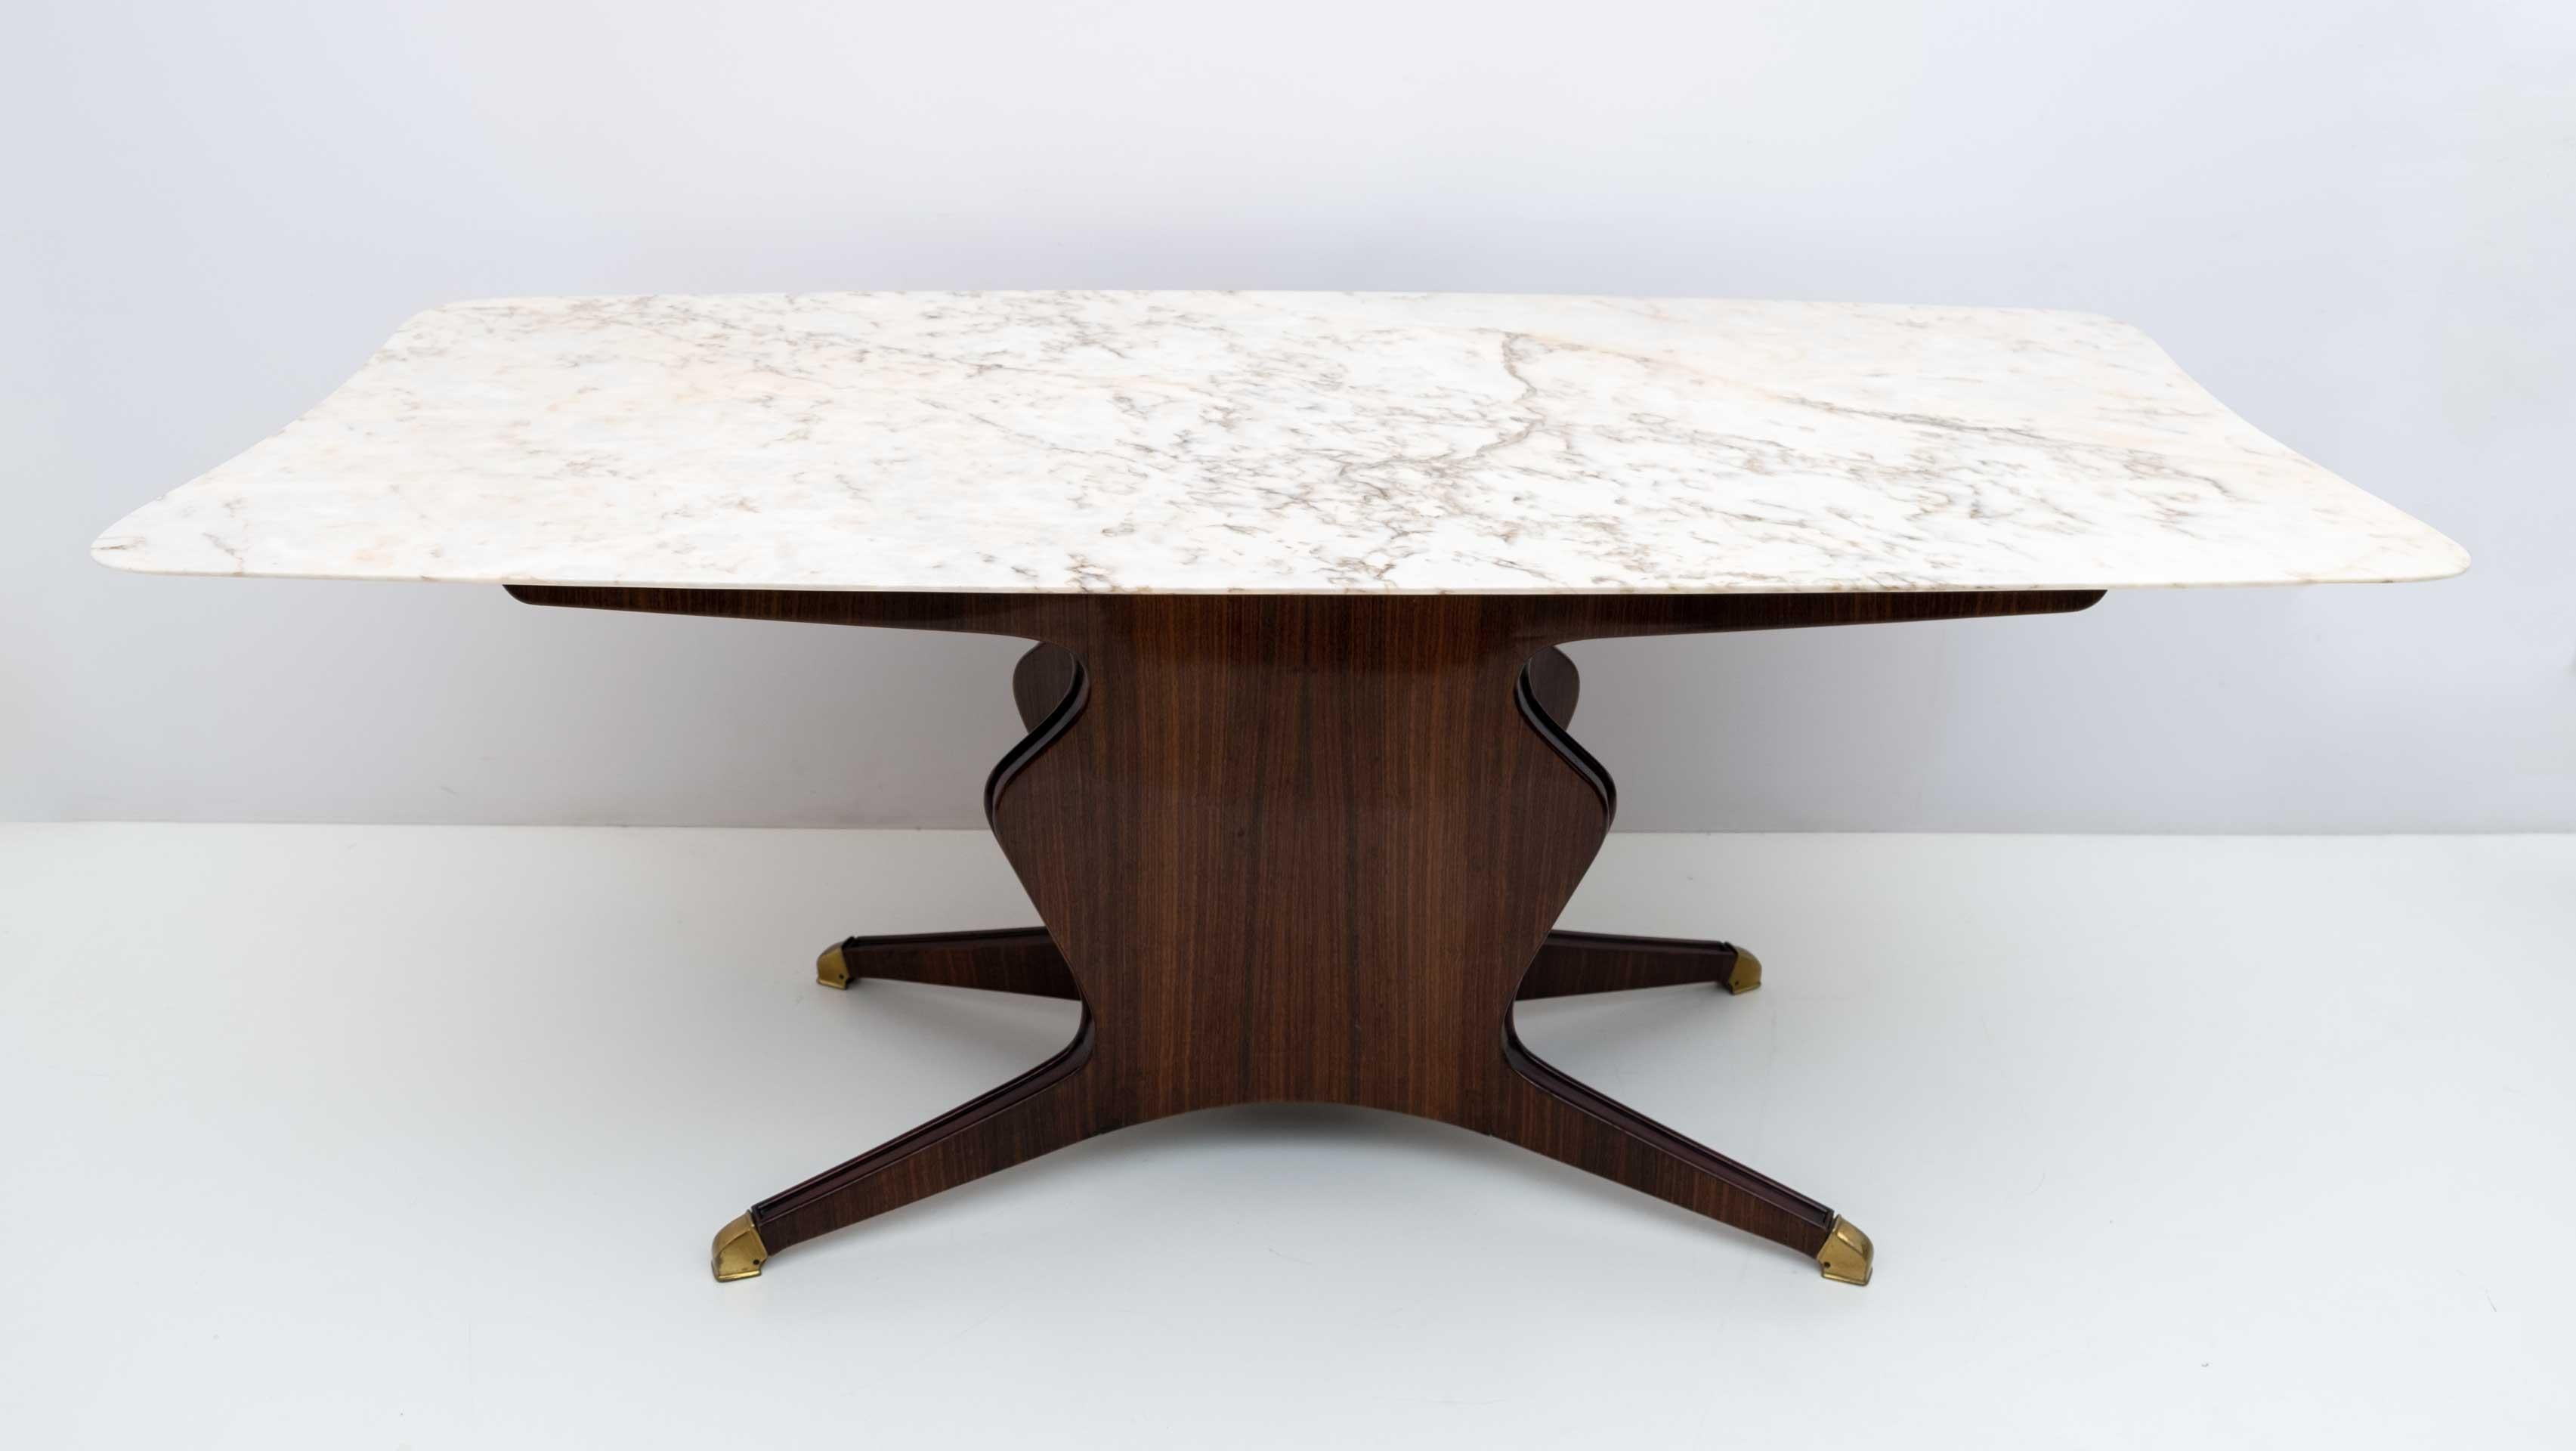 Elegant dining table designed by Osvaldo Borsani, a truly important piece and a great example of 1950s Italian design. Its structure is characterized by a uniquely shaped design, finished with brass feet and equipped with a calacatta marble top with